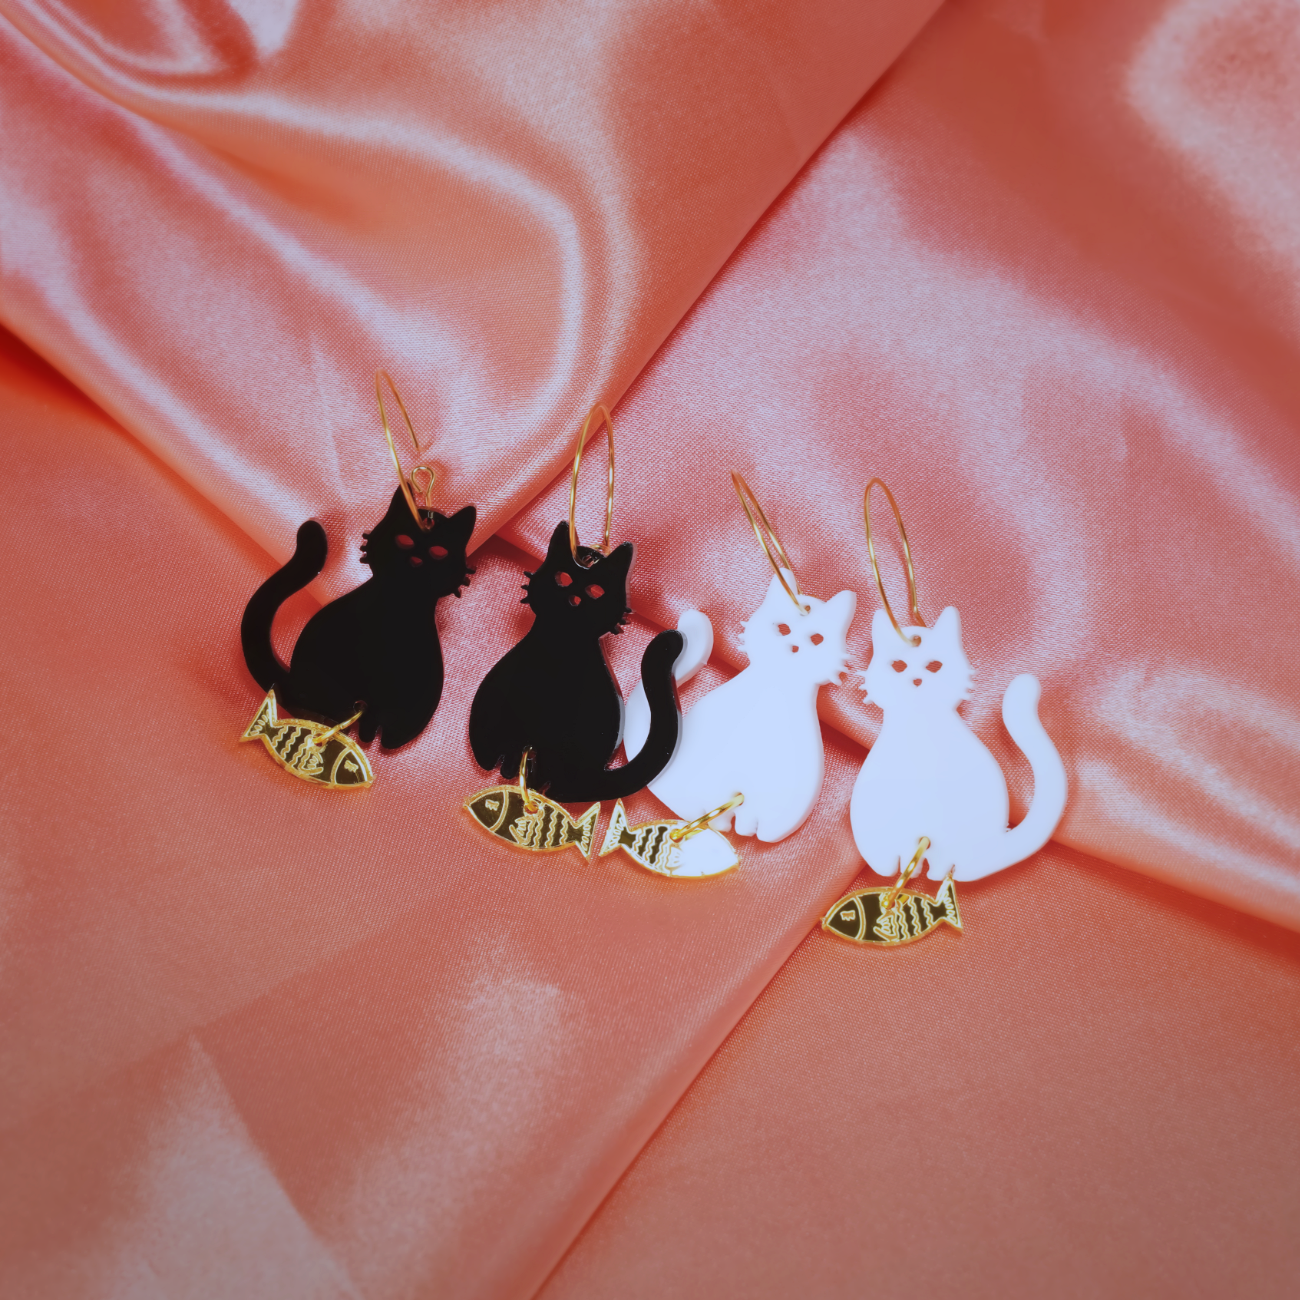 Acrylic black cat and gold fish earrings